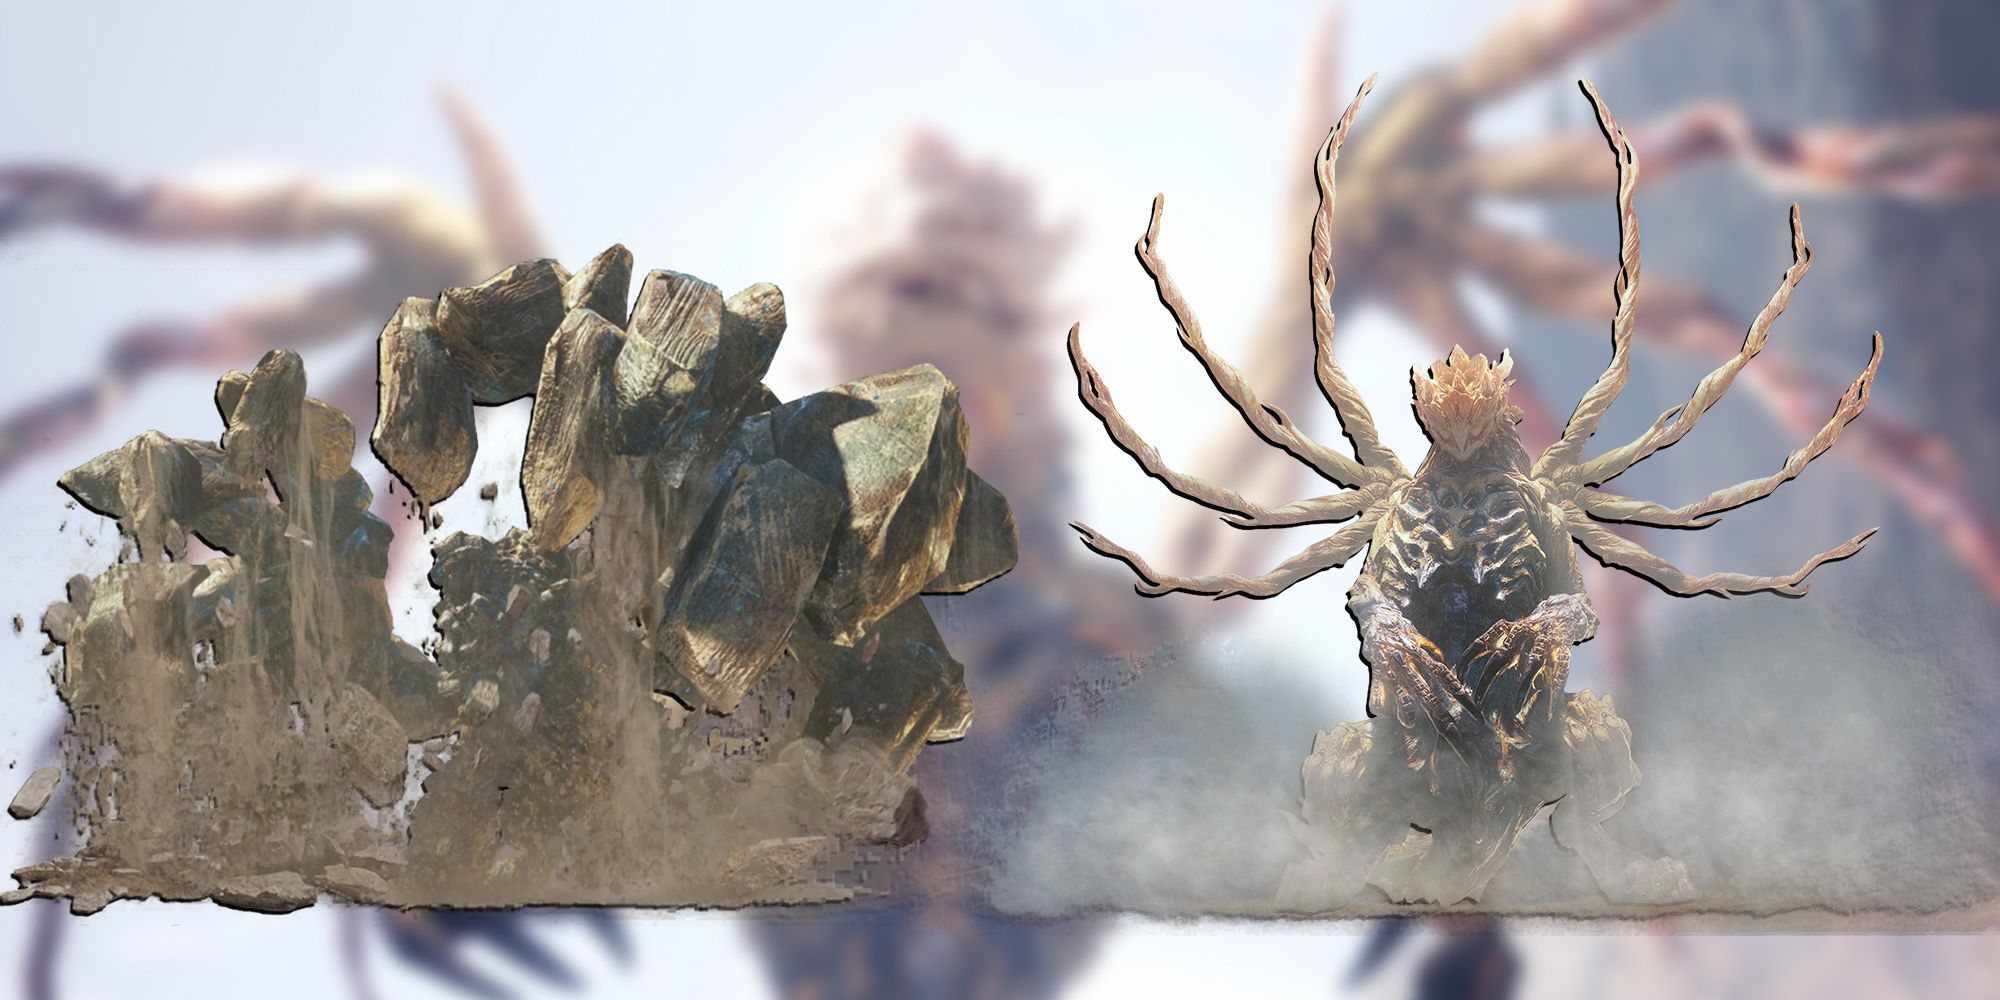 PNG Of Both Forms Of The Shara Ishvalda OVerlaid On Image Of Shara Revealing Its True Form In A Monster Hunter World Iceborne Cutscene